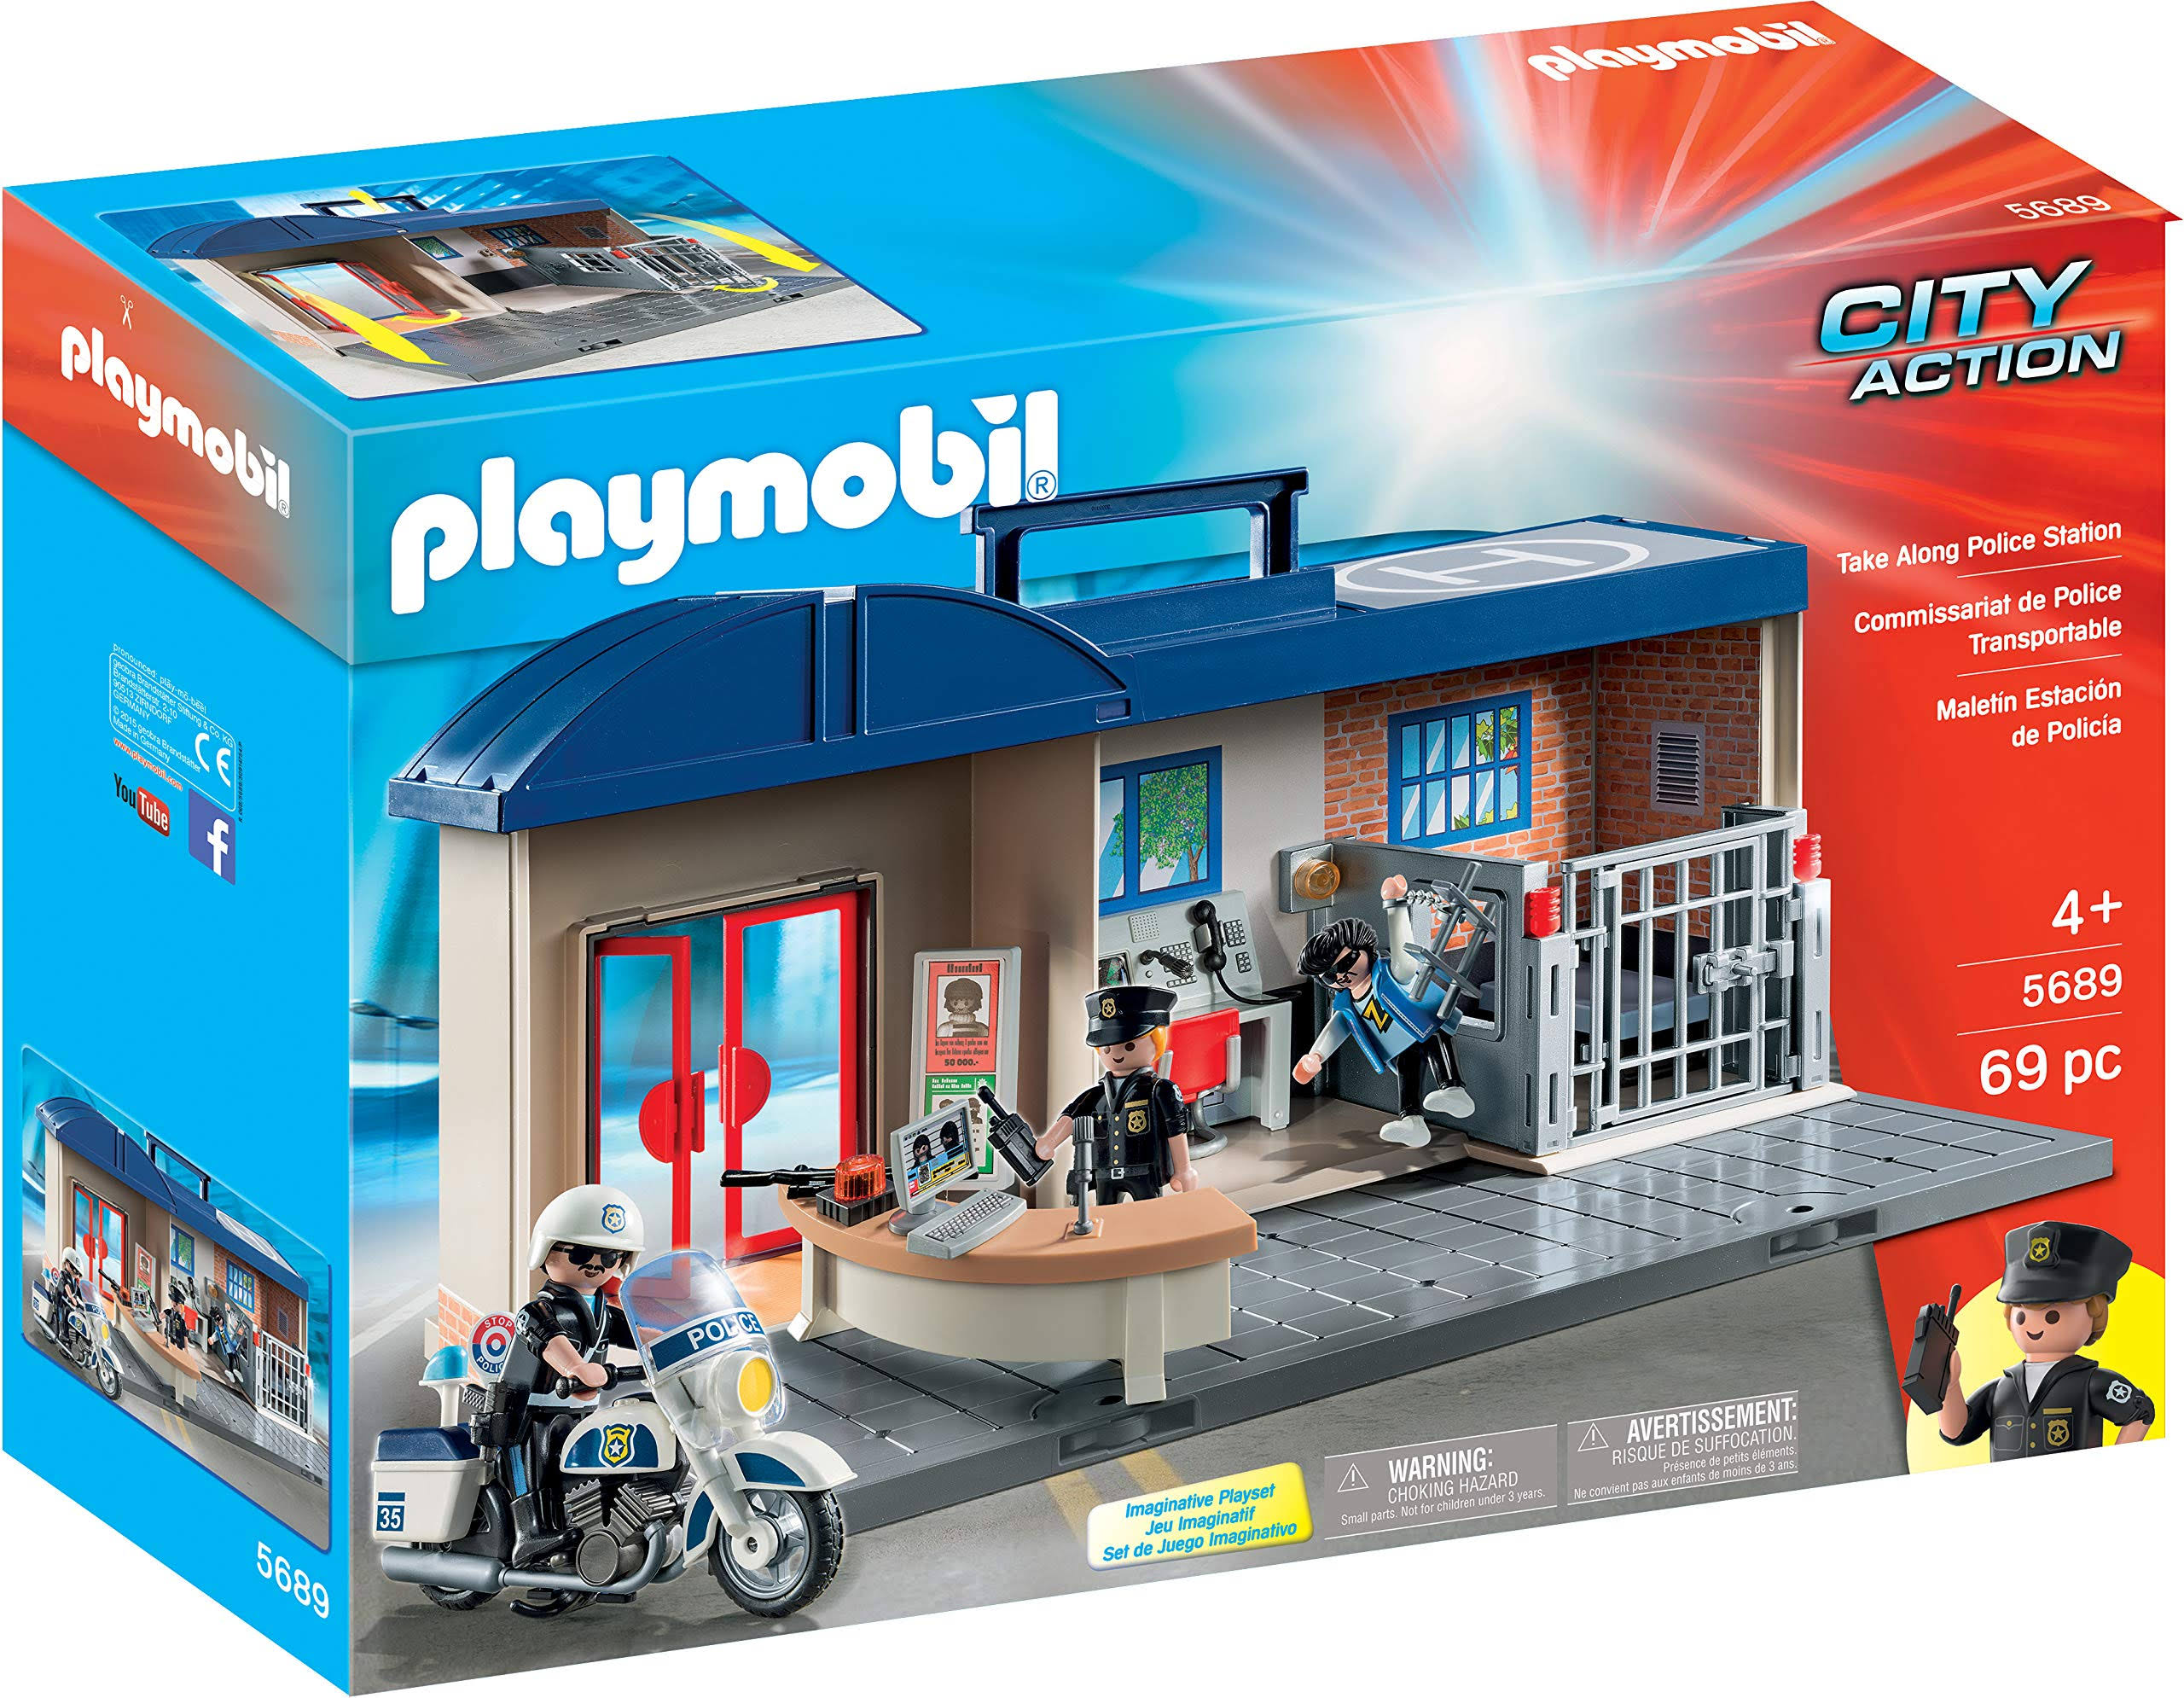 Playmobil 5689 City Action Take Along Police Station - 69 Pieces